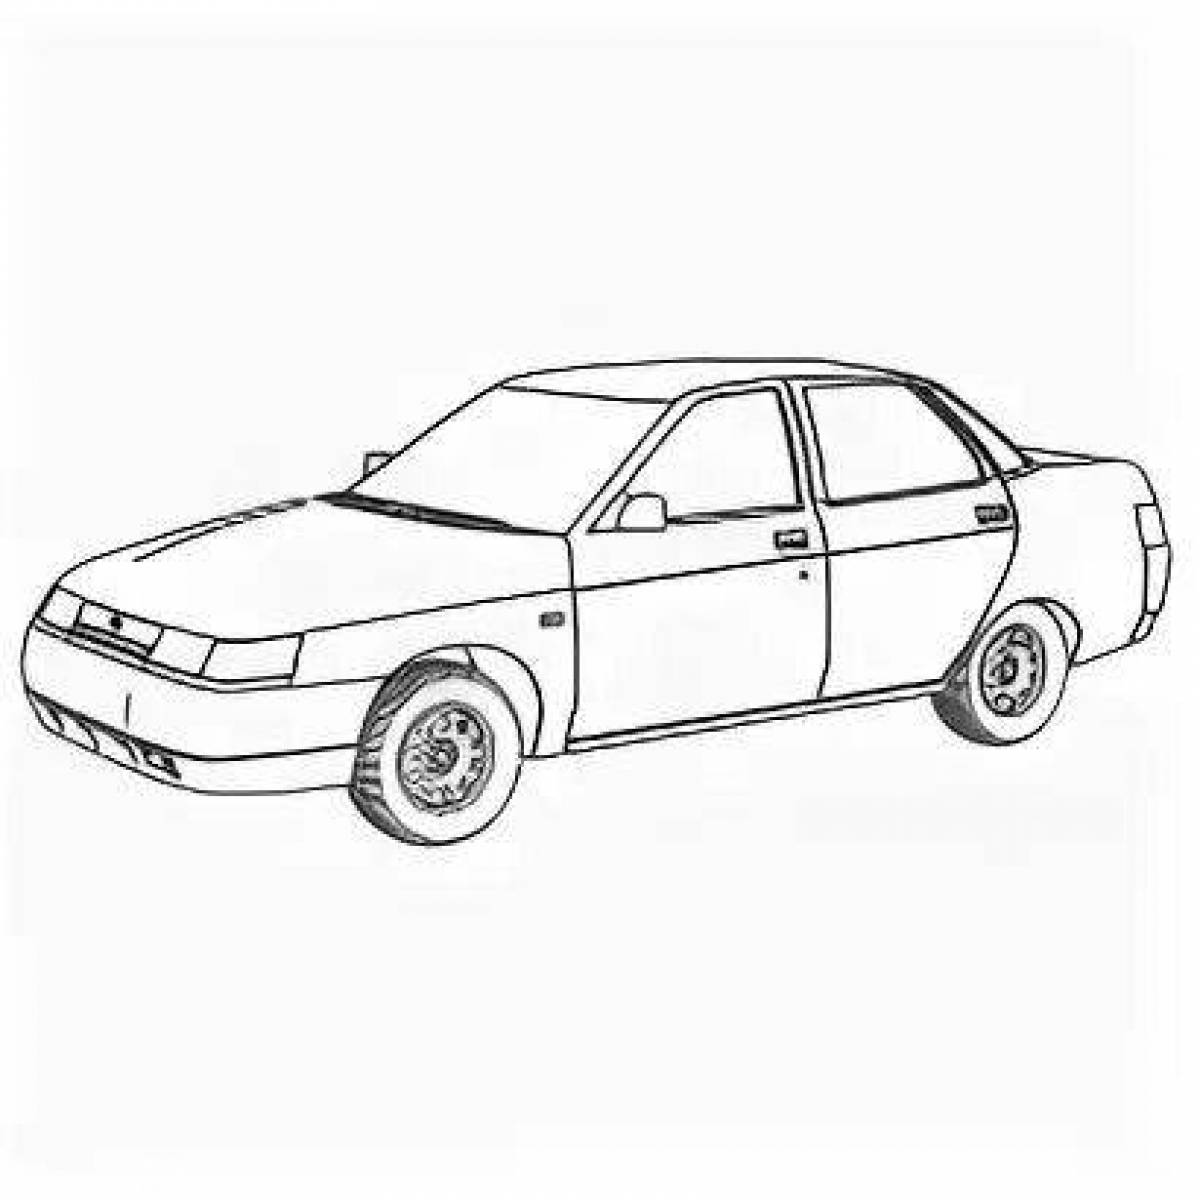 Outstanding vaz 2110 coloring book